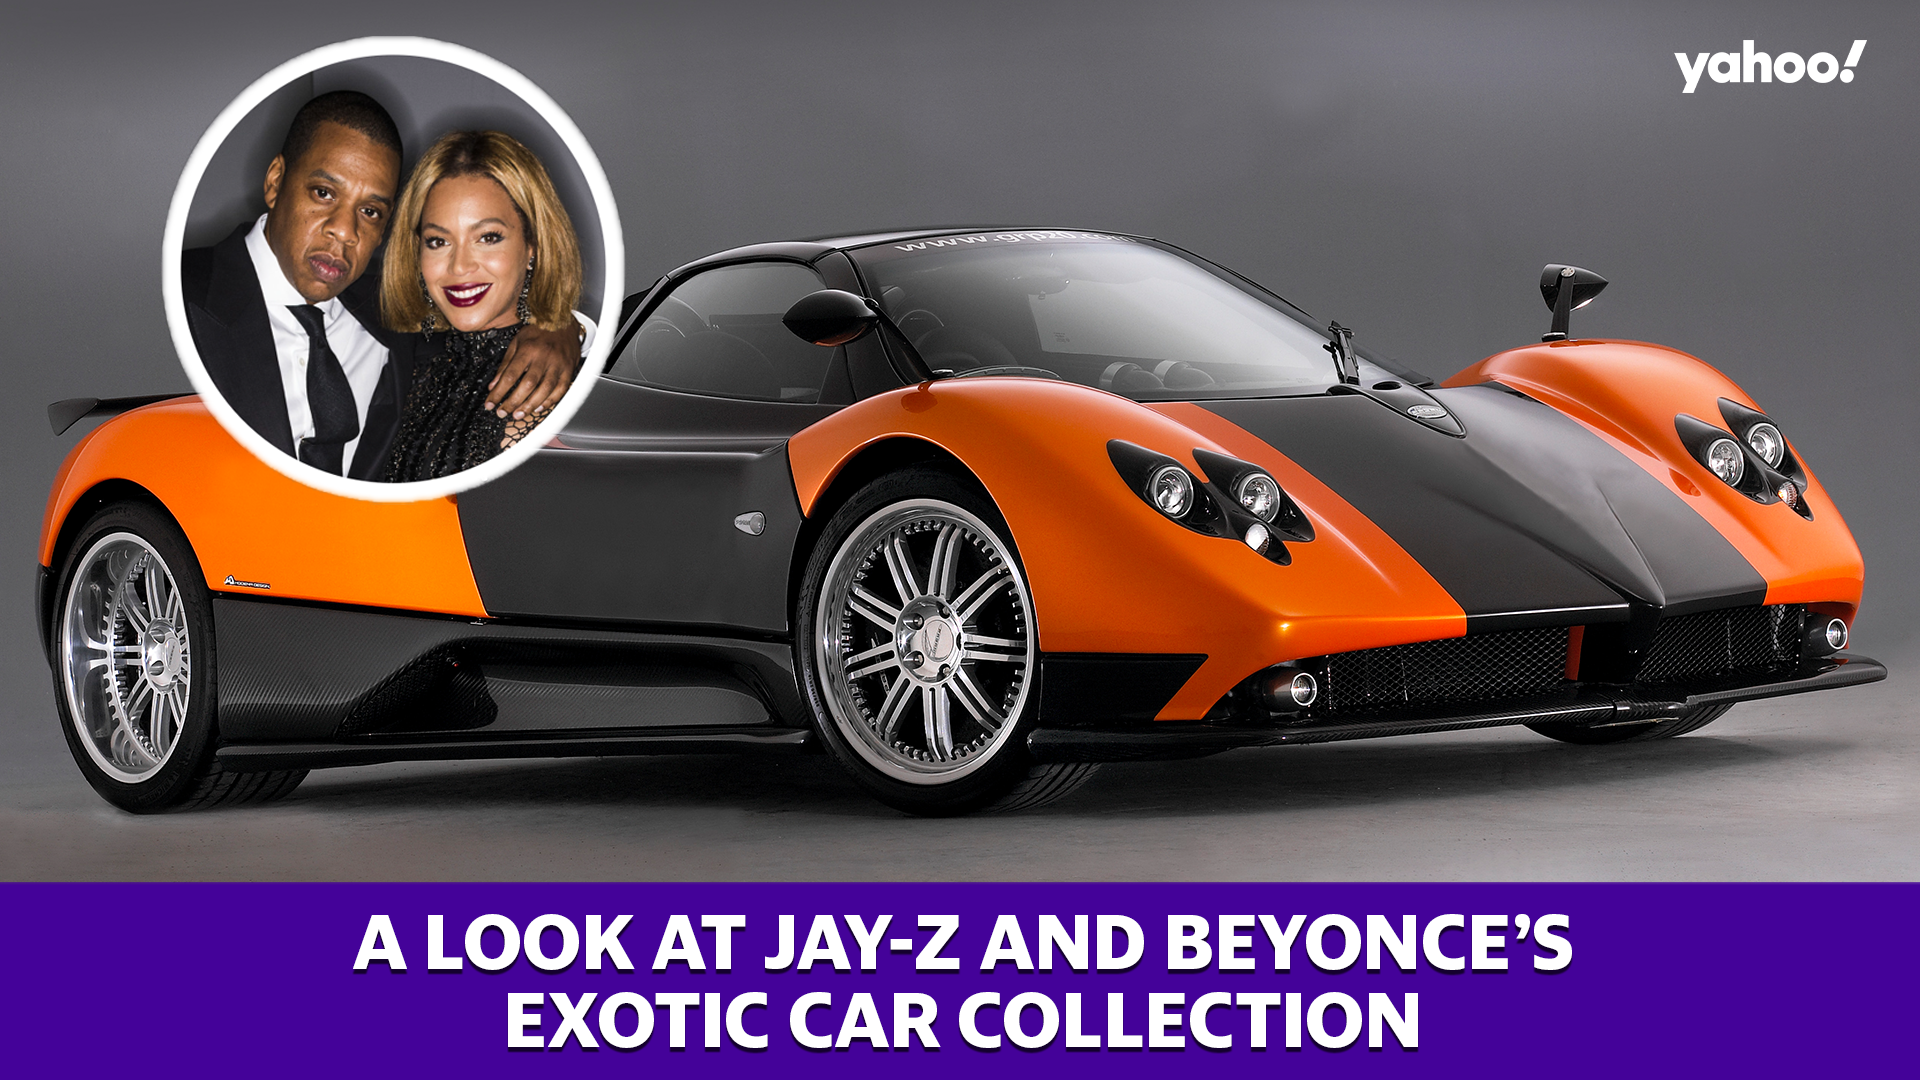 beyonce cars collection